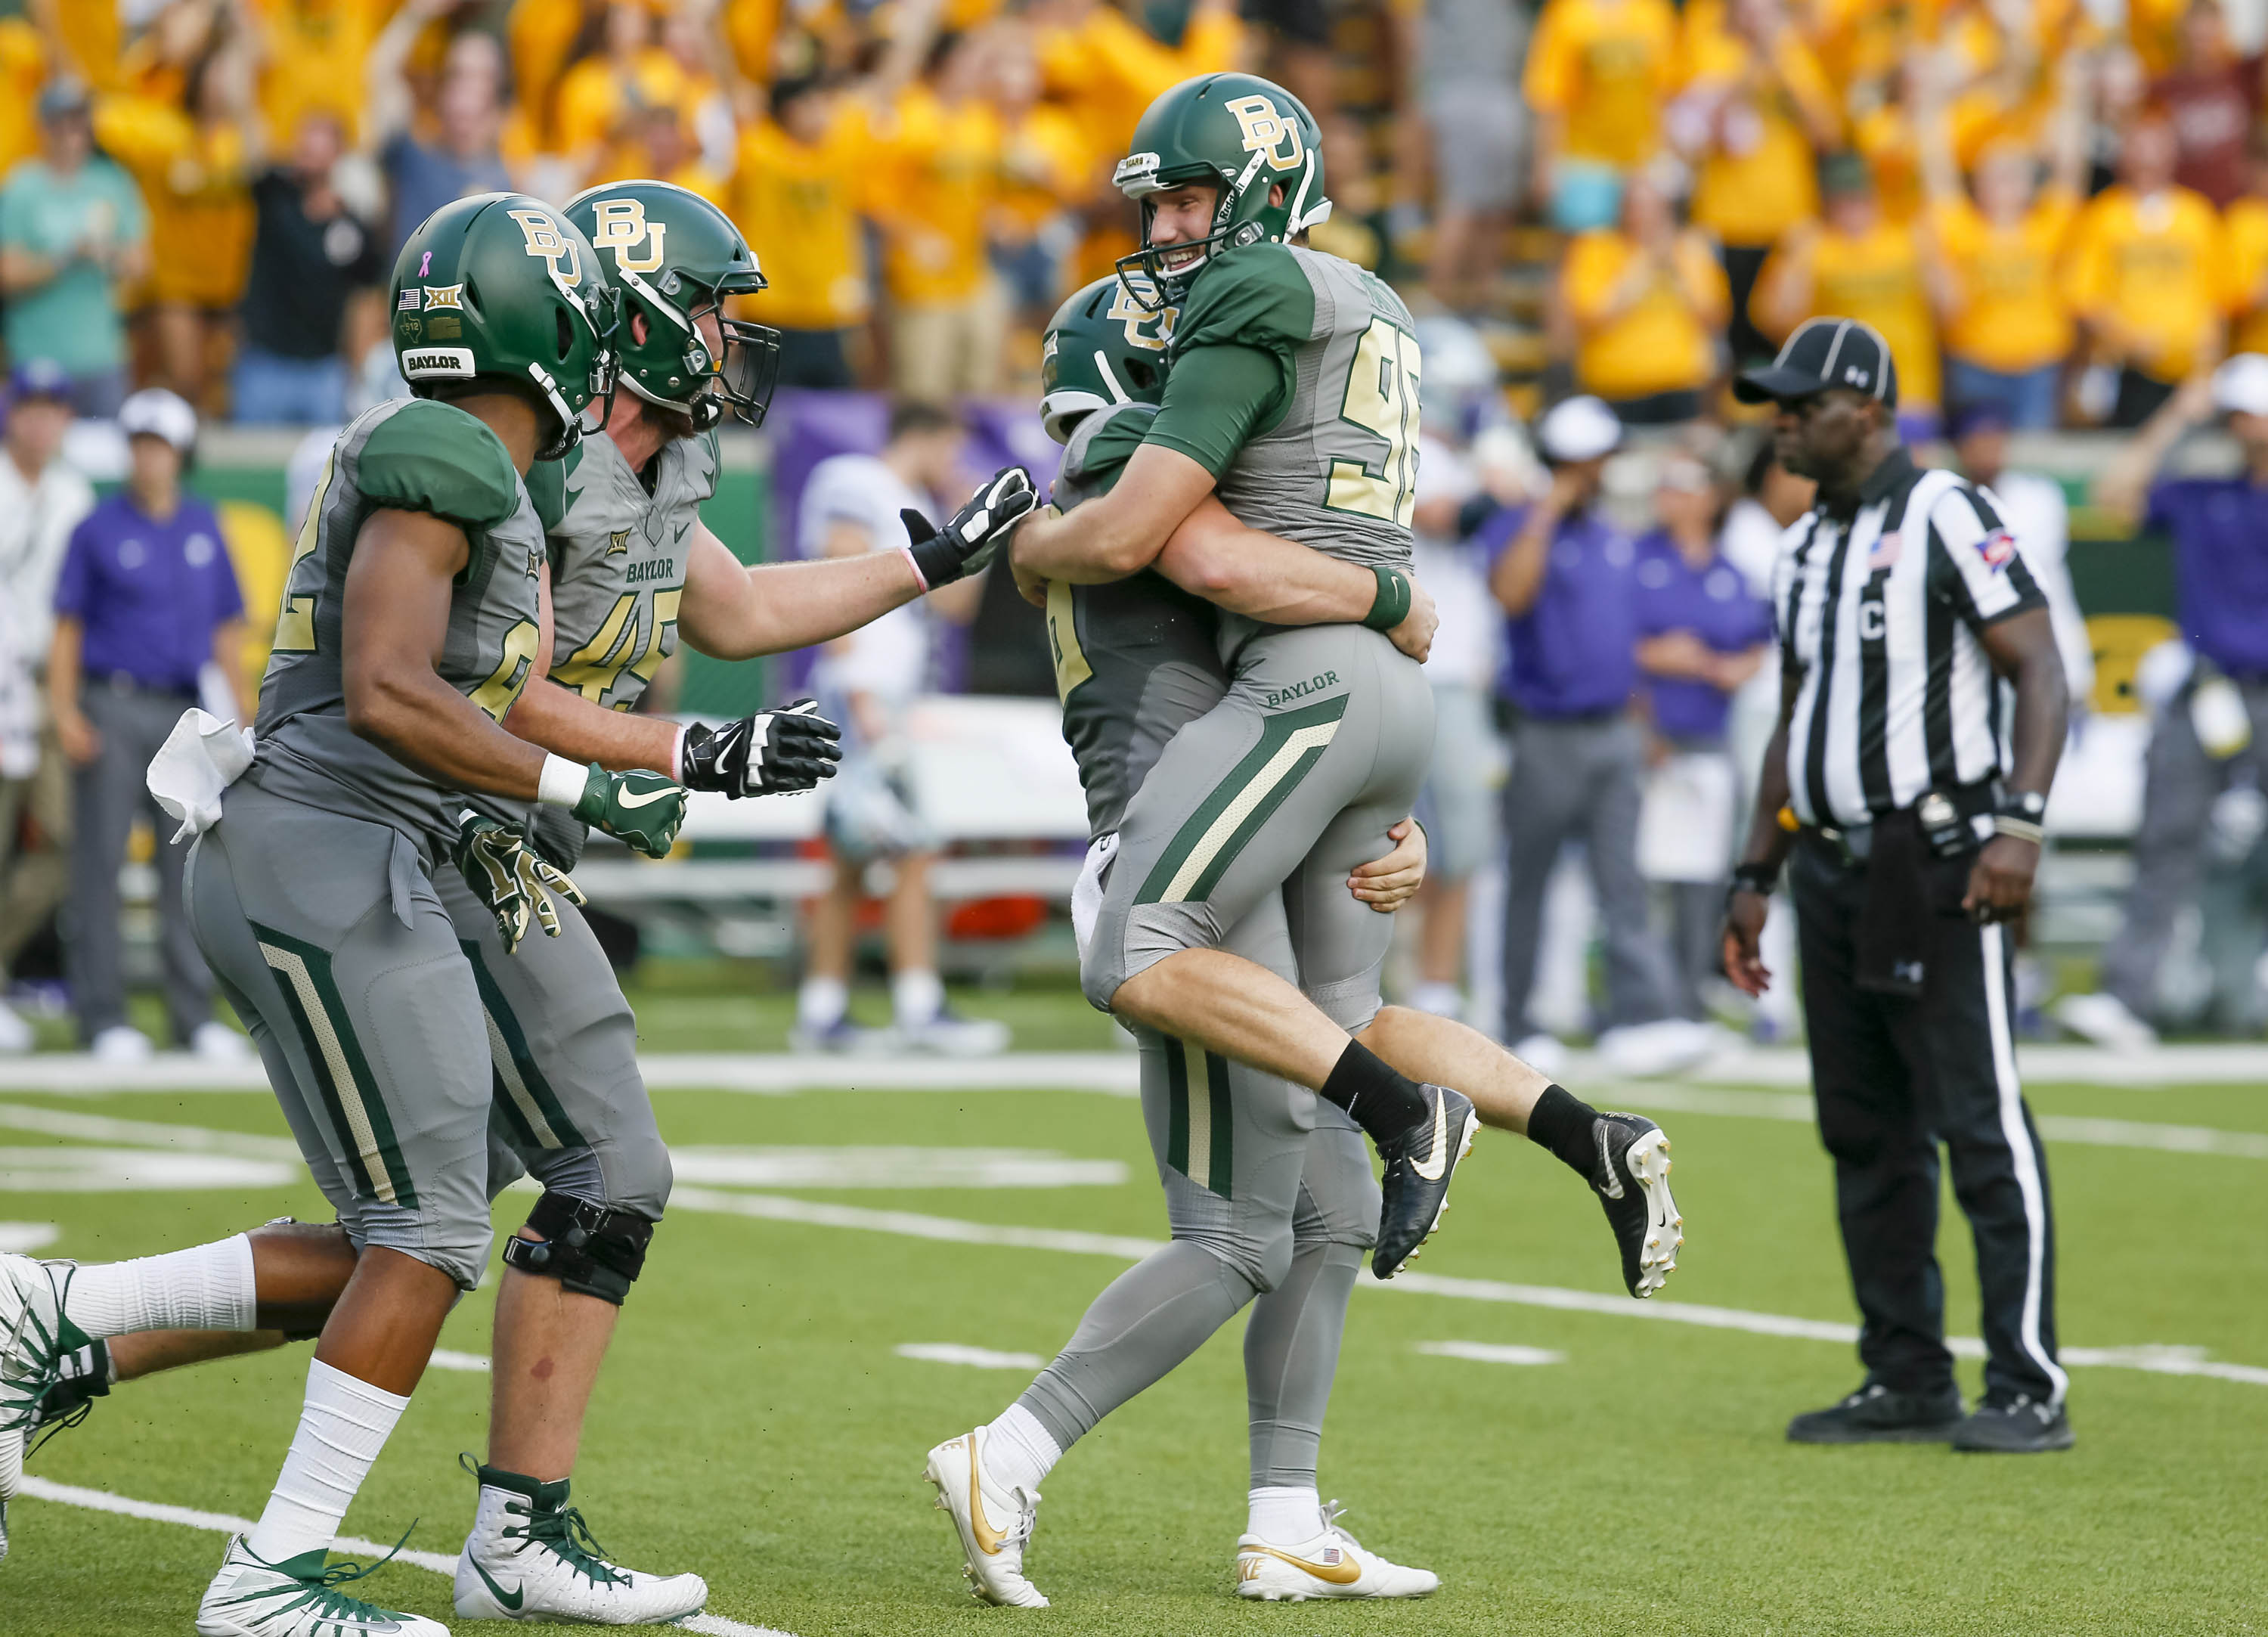 Baylor beats K-State on Martin's FG with 8 seconds left